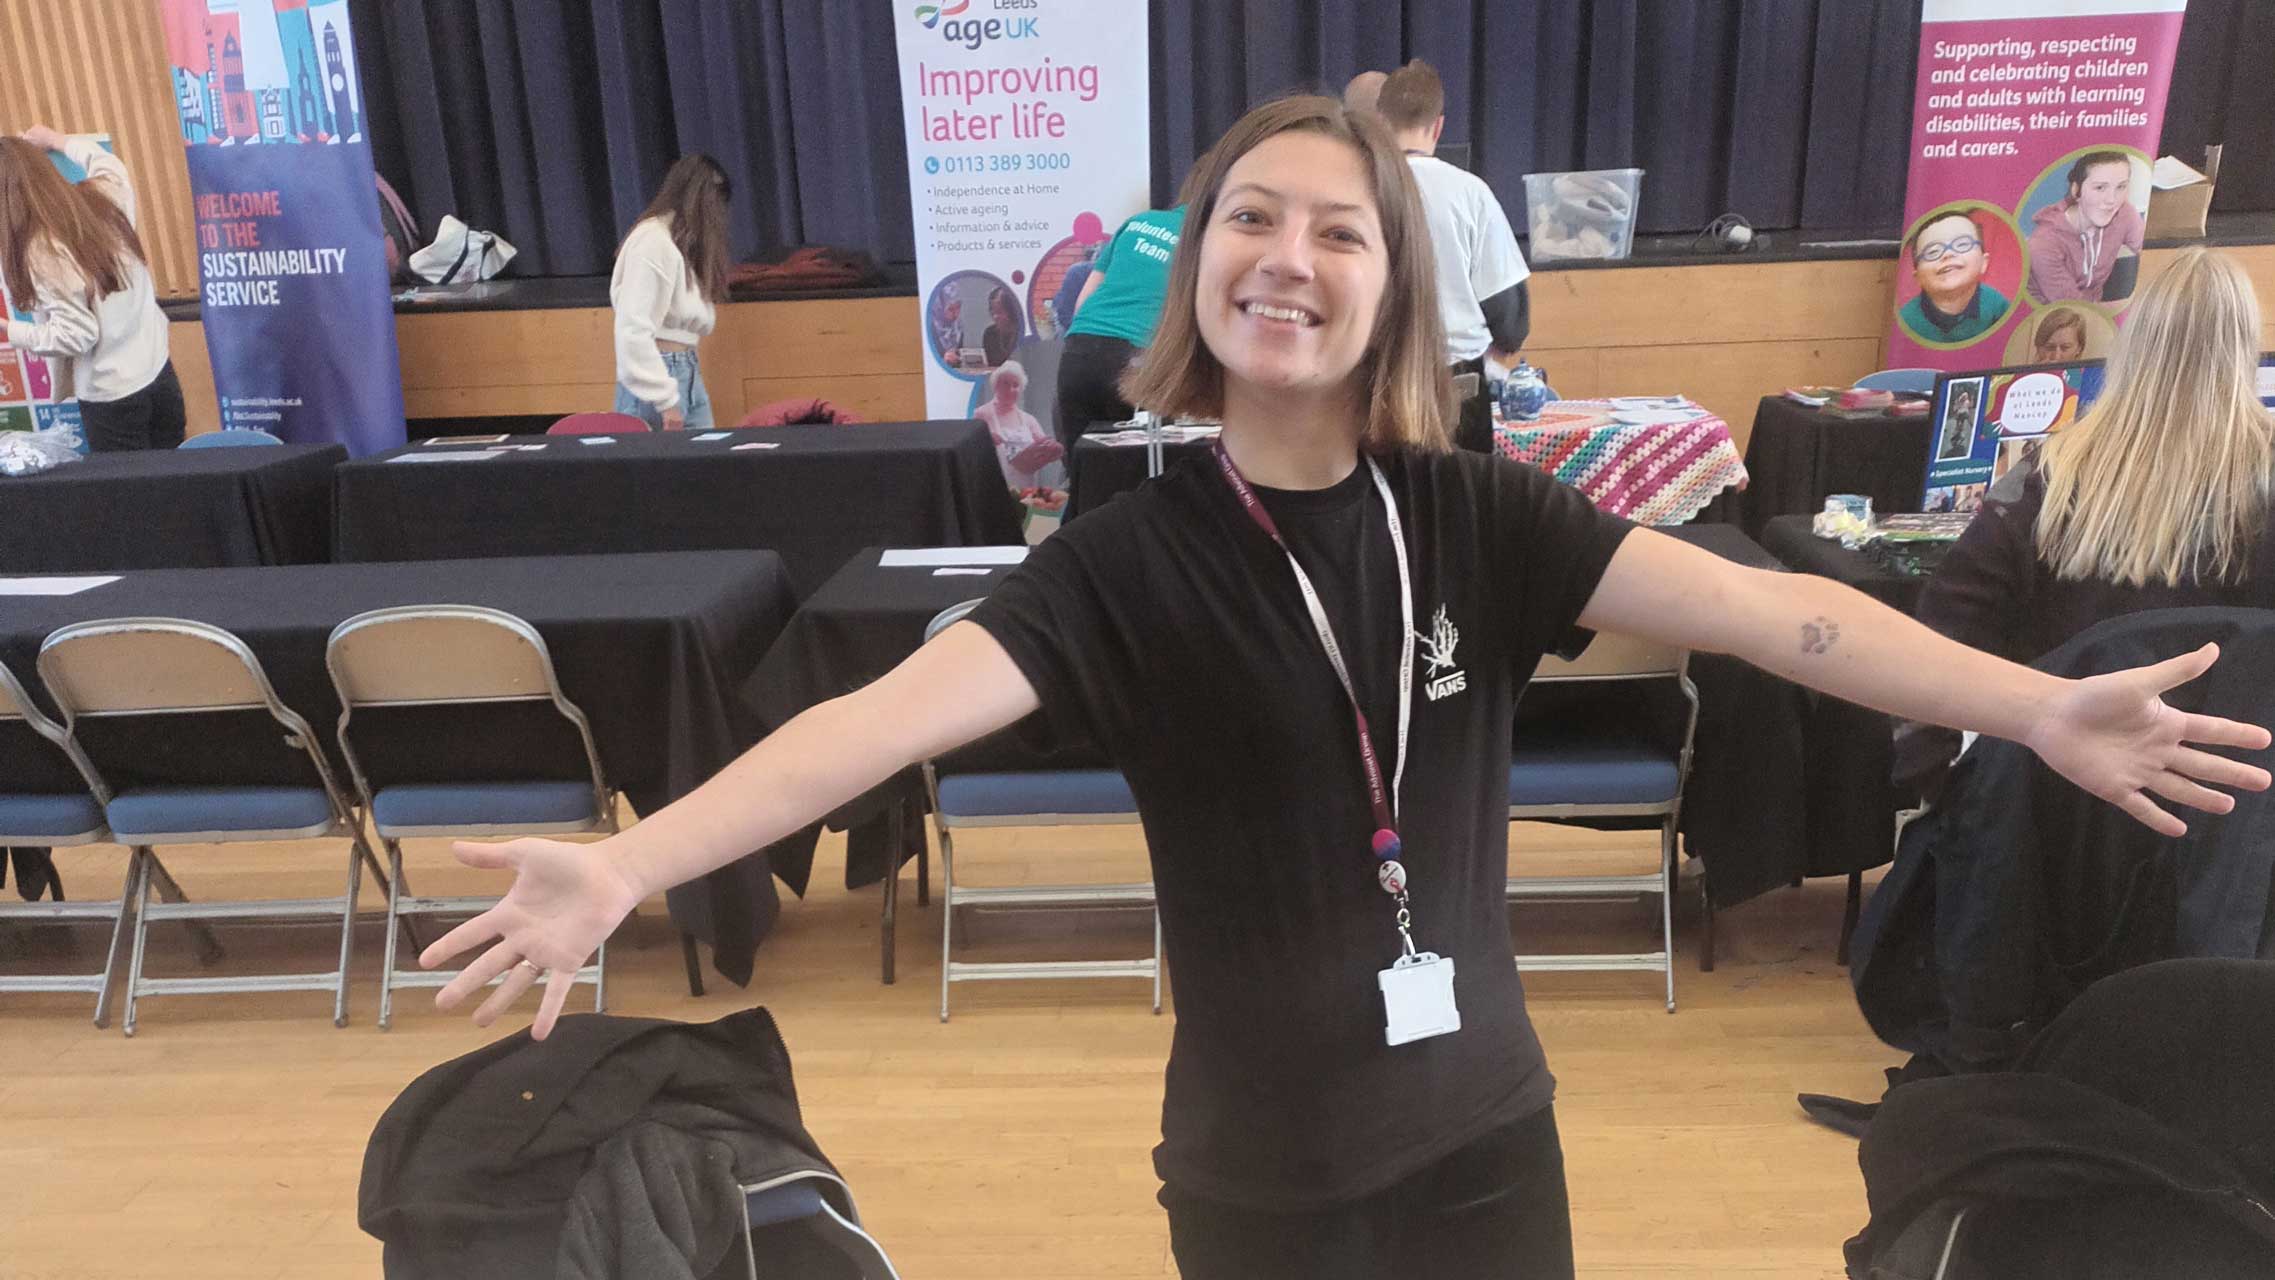 A photo of Beth, Leeds Autism AIM's Volunteer Coordinator, at a stall for a volunteering event. They have their arms outstretched. They are also smiling.